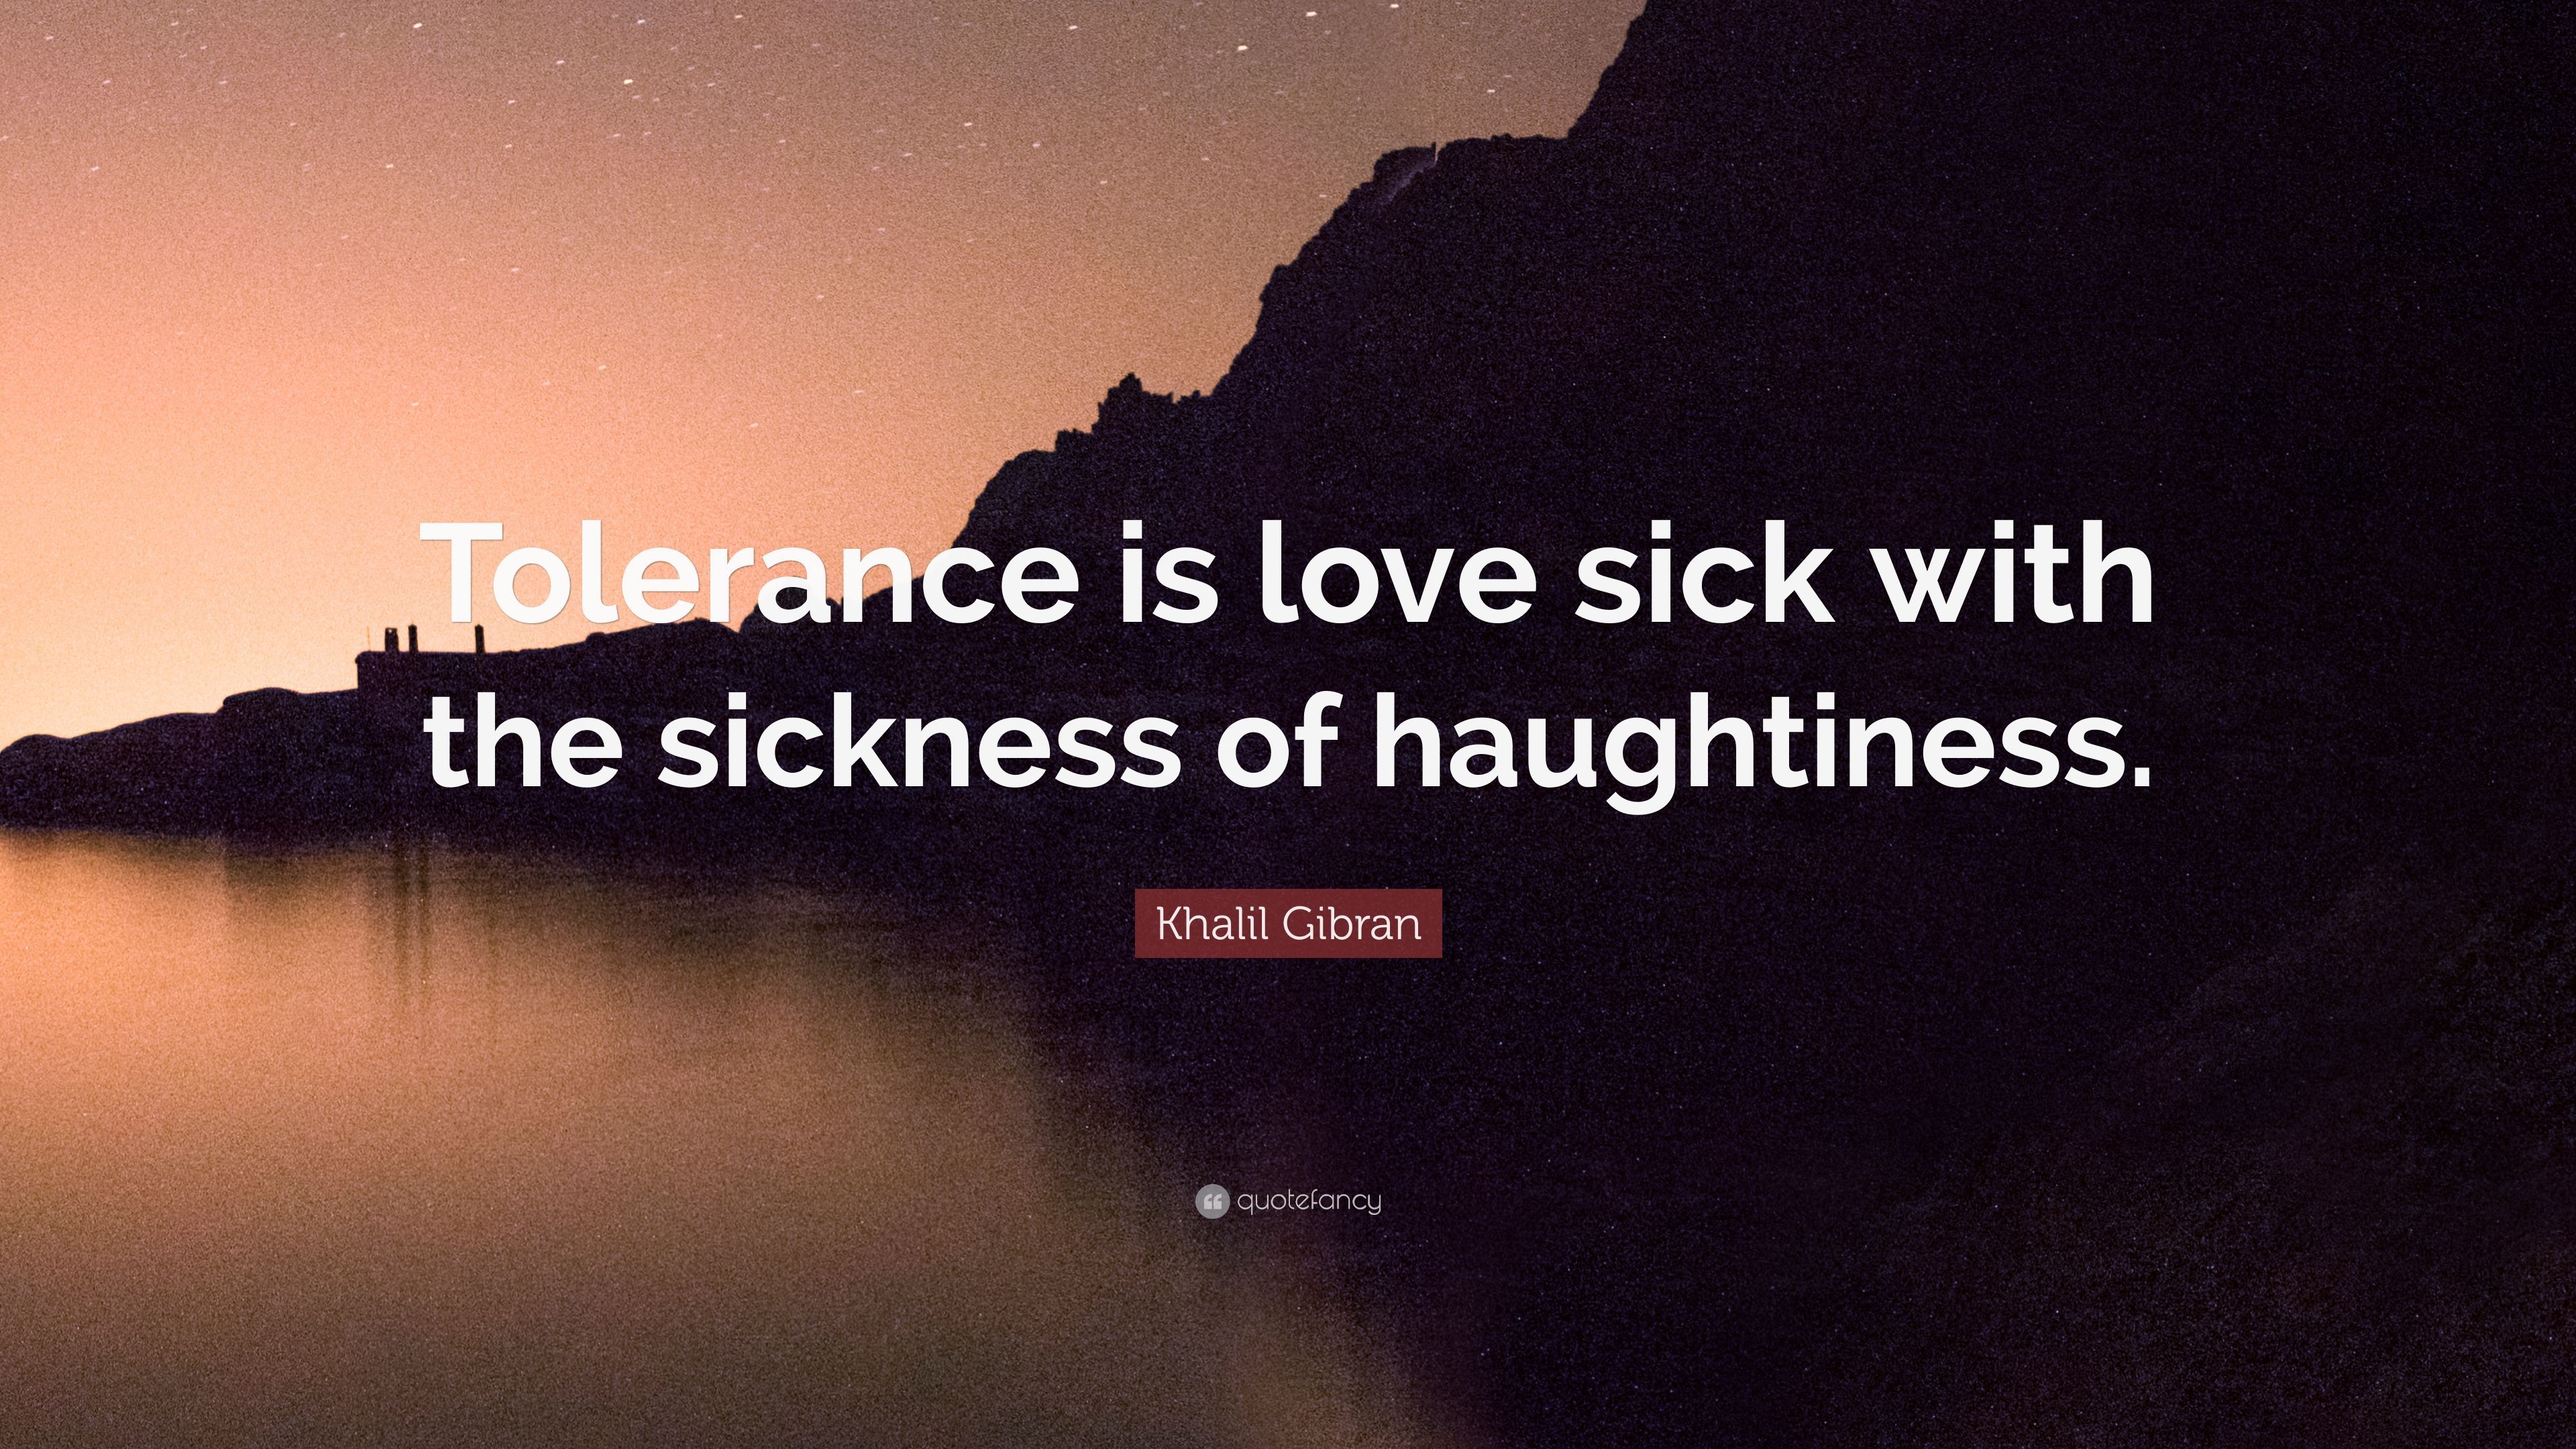 Khalil Gibran Quote: “Tolerance is love sick with the sickness of haughtiness.” (7 wallpaper)